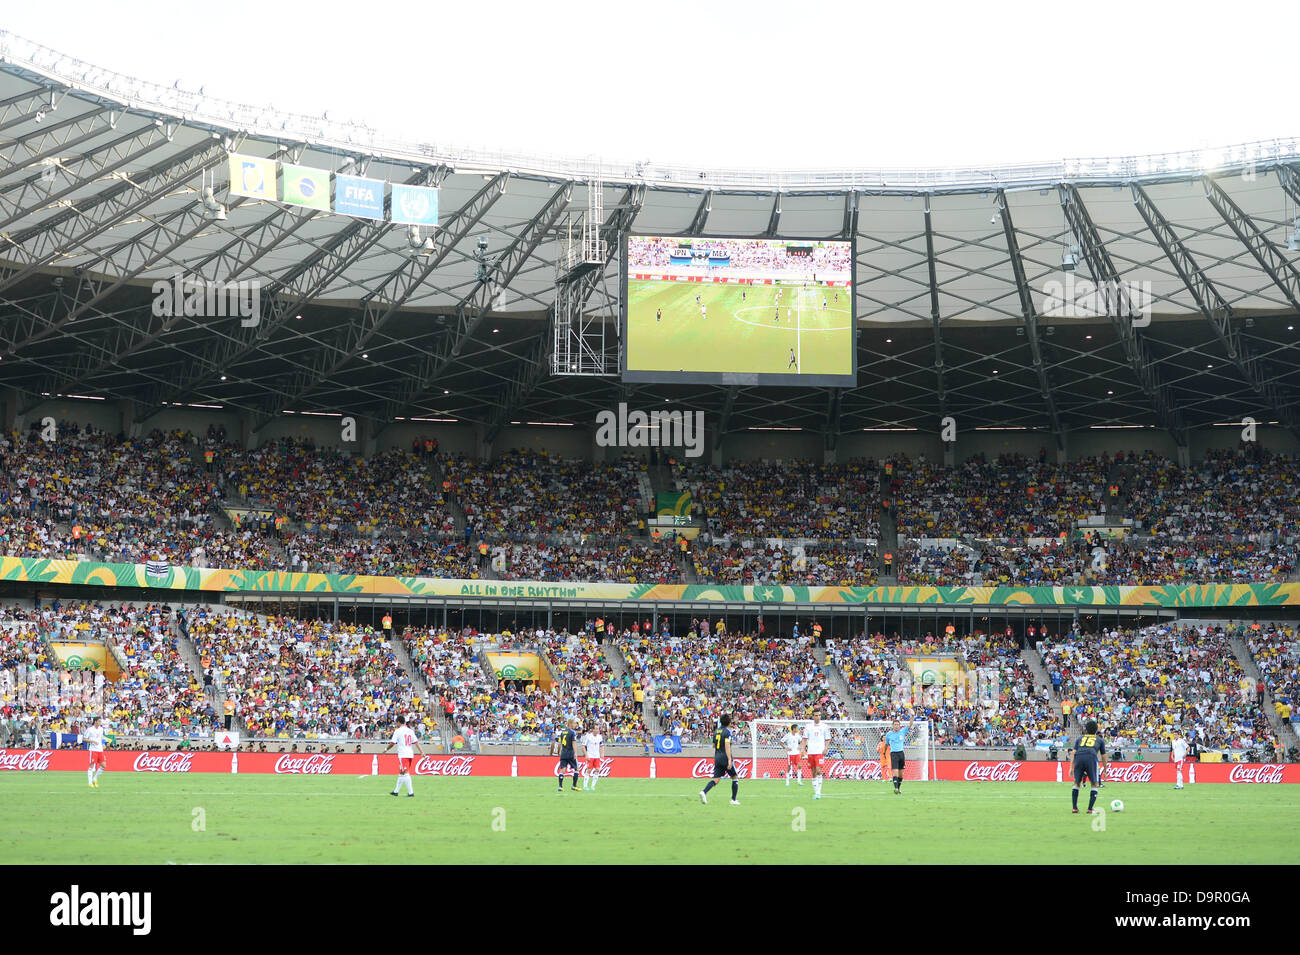 General view, JUNE 22, 2013 - Football / Soccer : FIFA Confederations Cup Brazil 2013 Group A match between Japan 1-2 Mexico at Estadio Mineirao in Belo Horizonte, Brazil. (Photo by Hitoshi Mochizuki/AFLO) Stock Photo